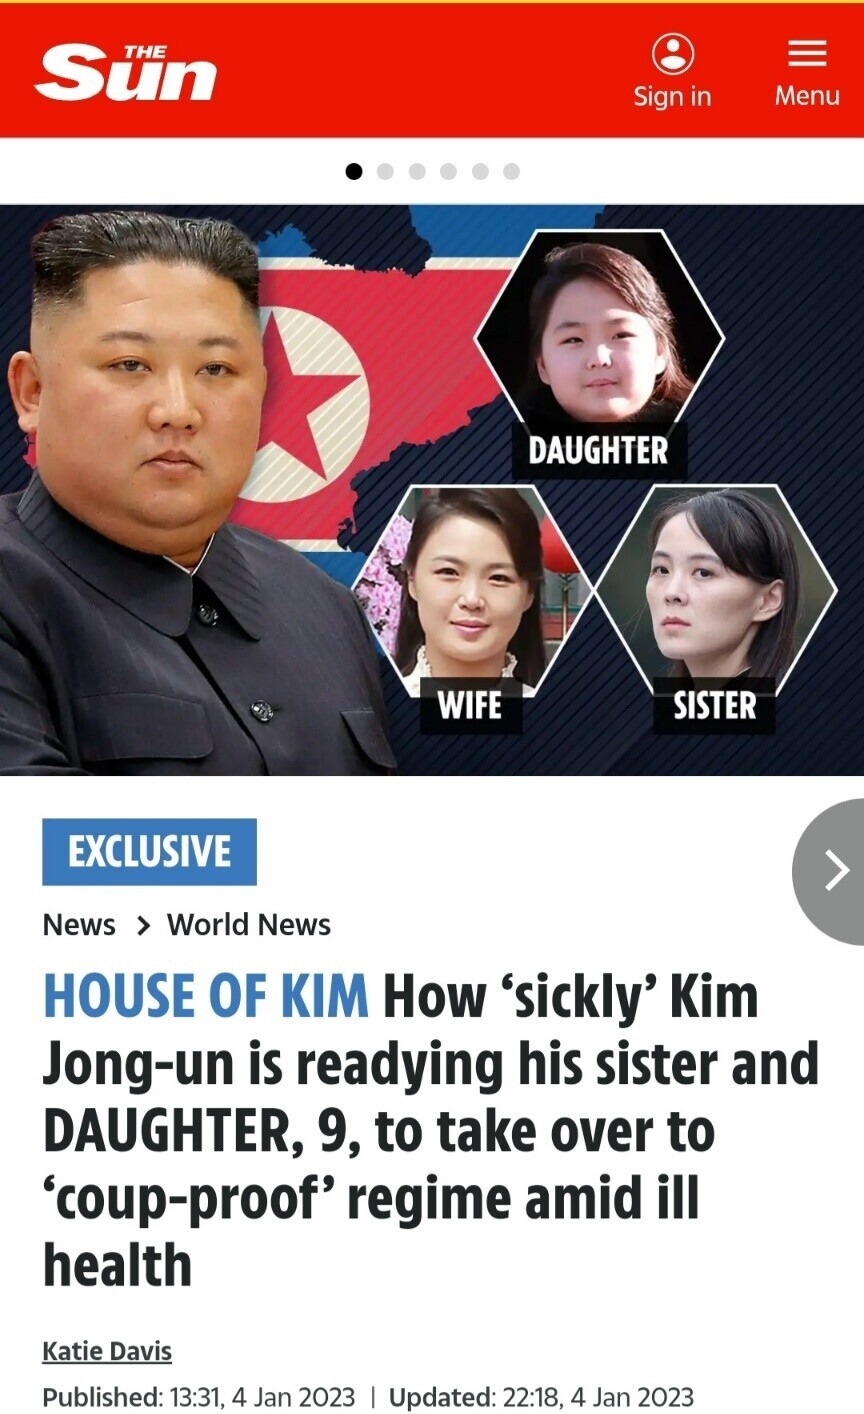 Article about North Korea in the UK’s The Sun daily.